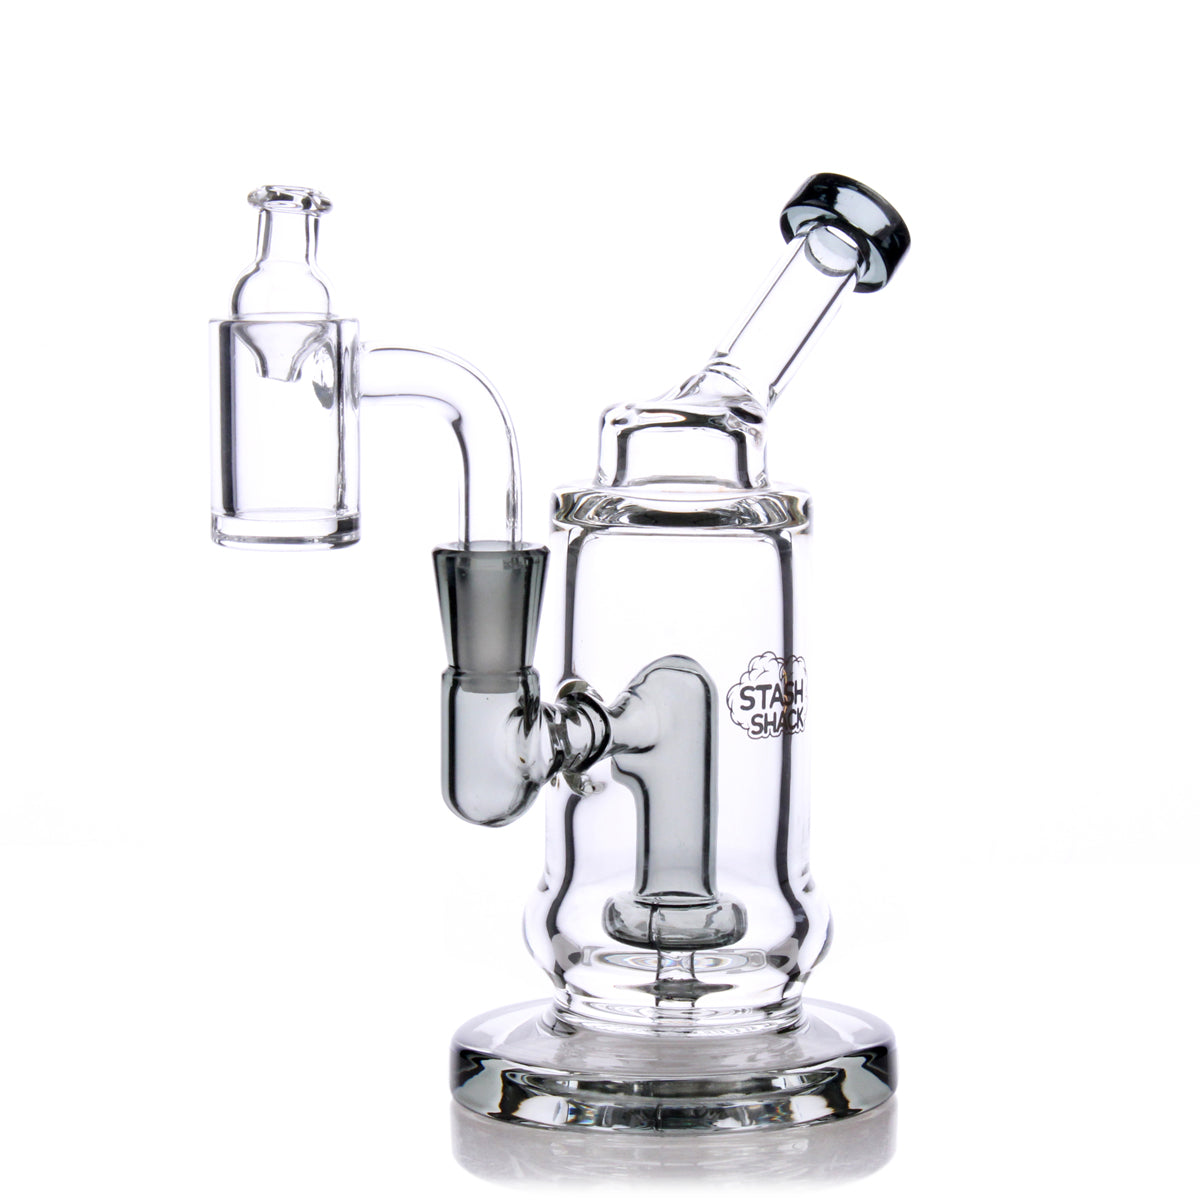 TerpDroid Mini Rig by The Stash Shack, compact 5.5" dab rig with showerhead percolator, front view on white background